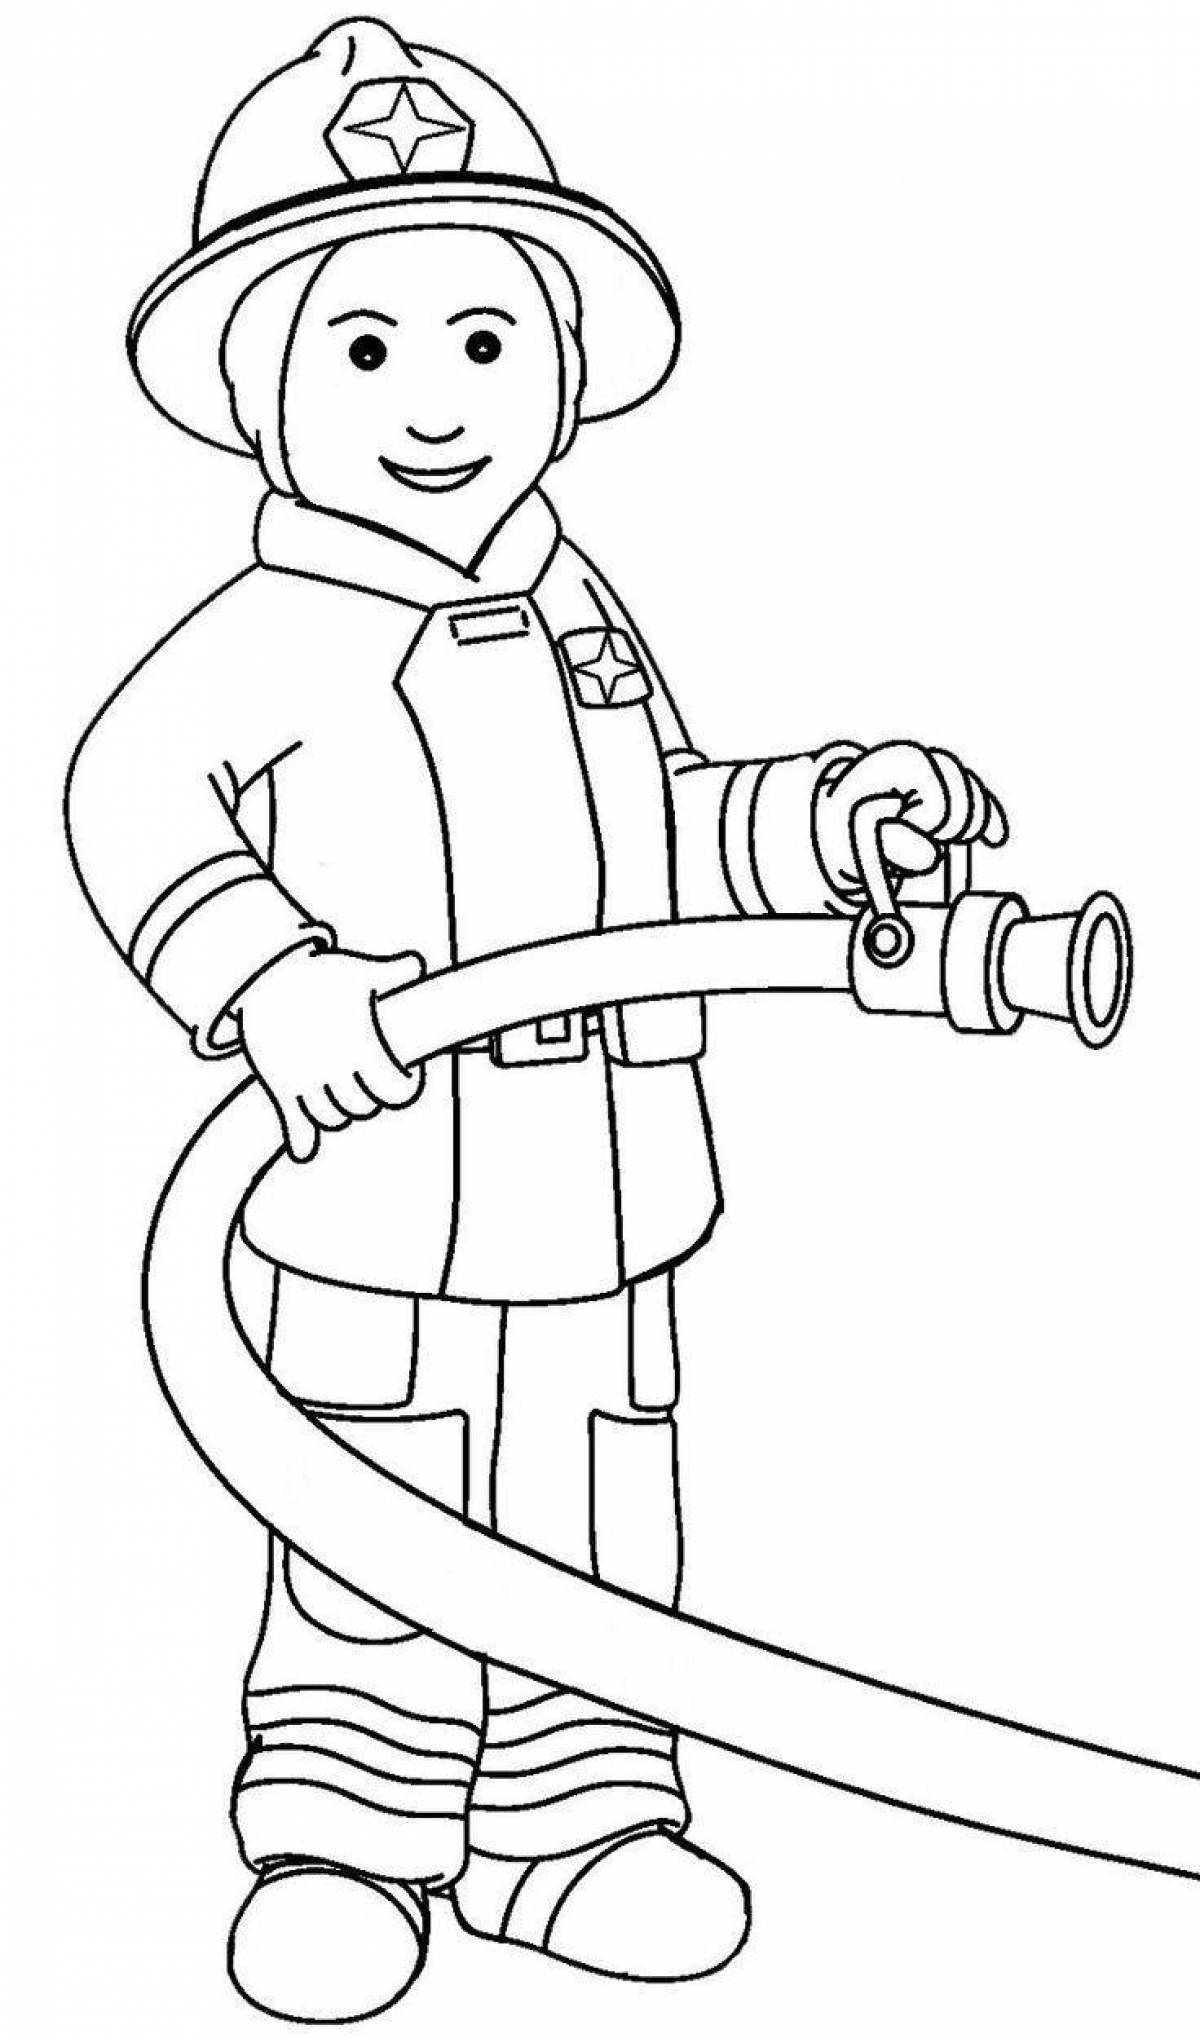 Amazing coloring pages of firefighters for kids